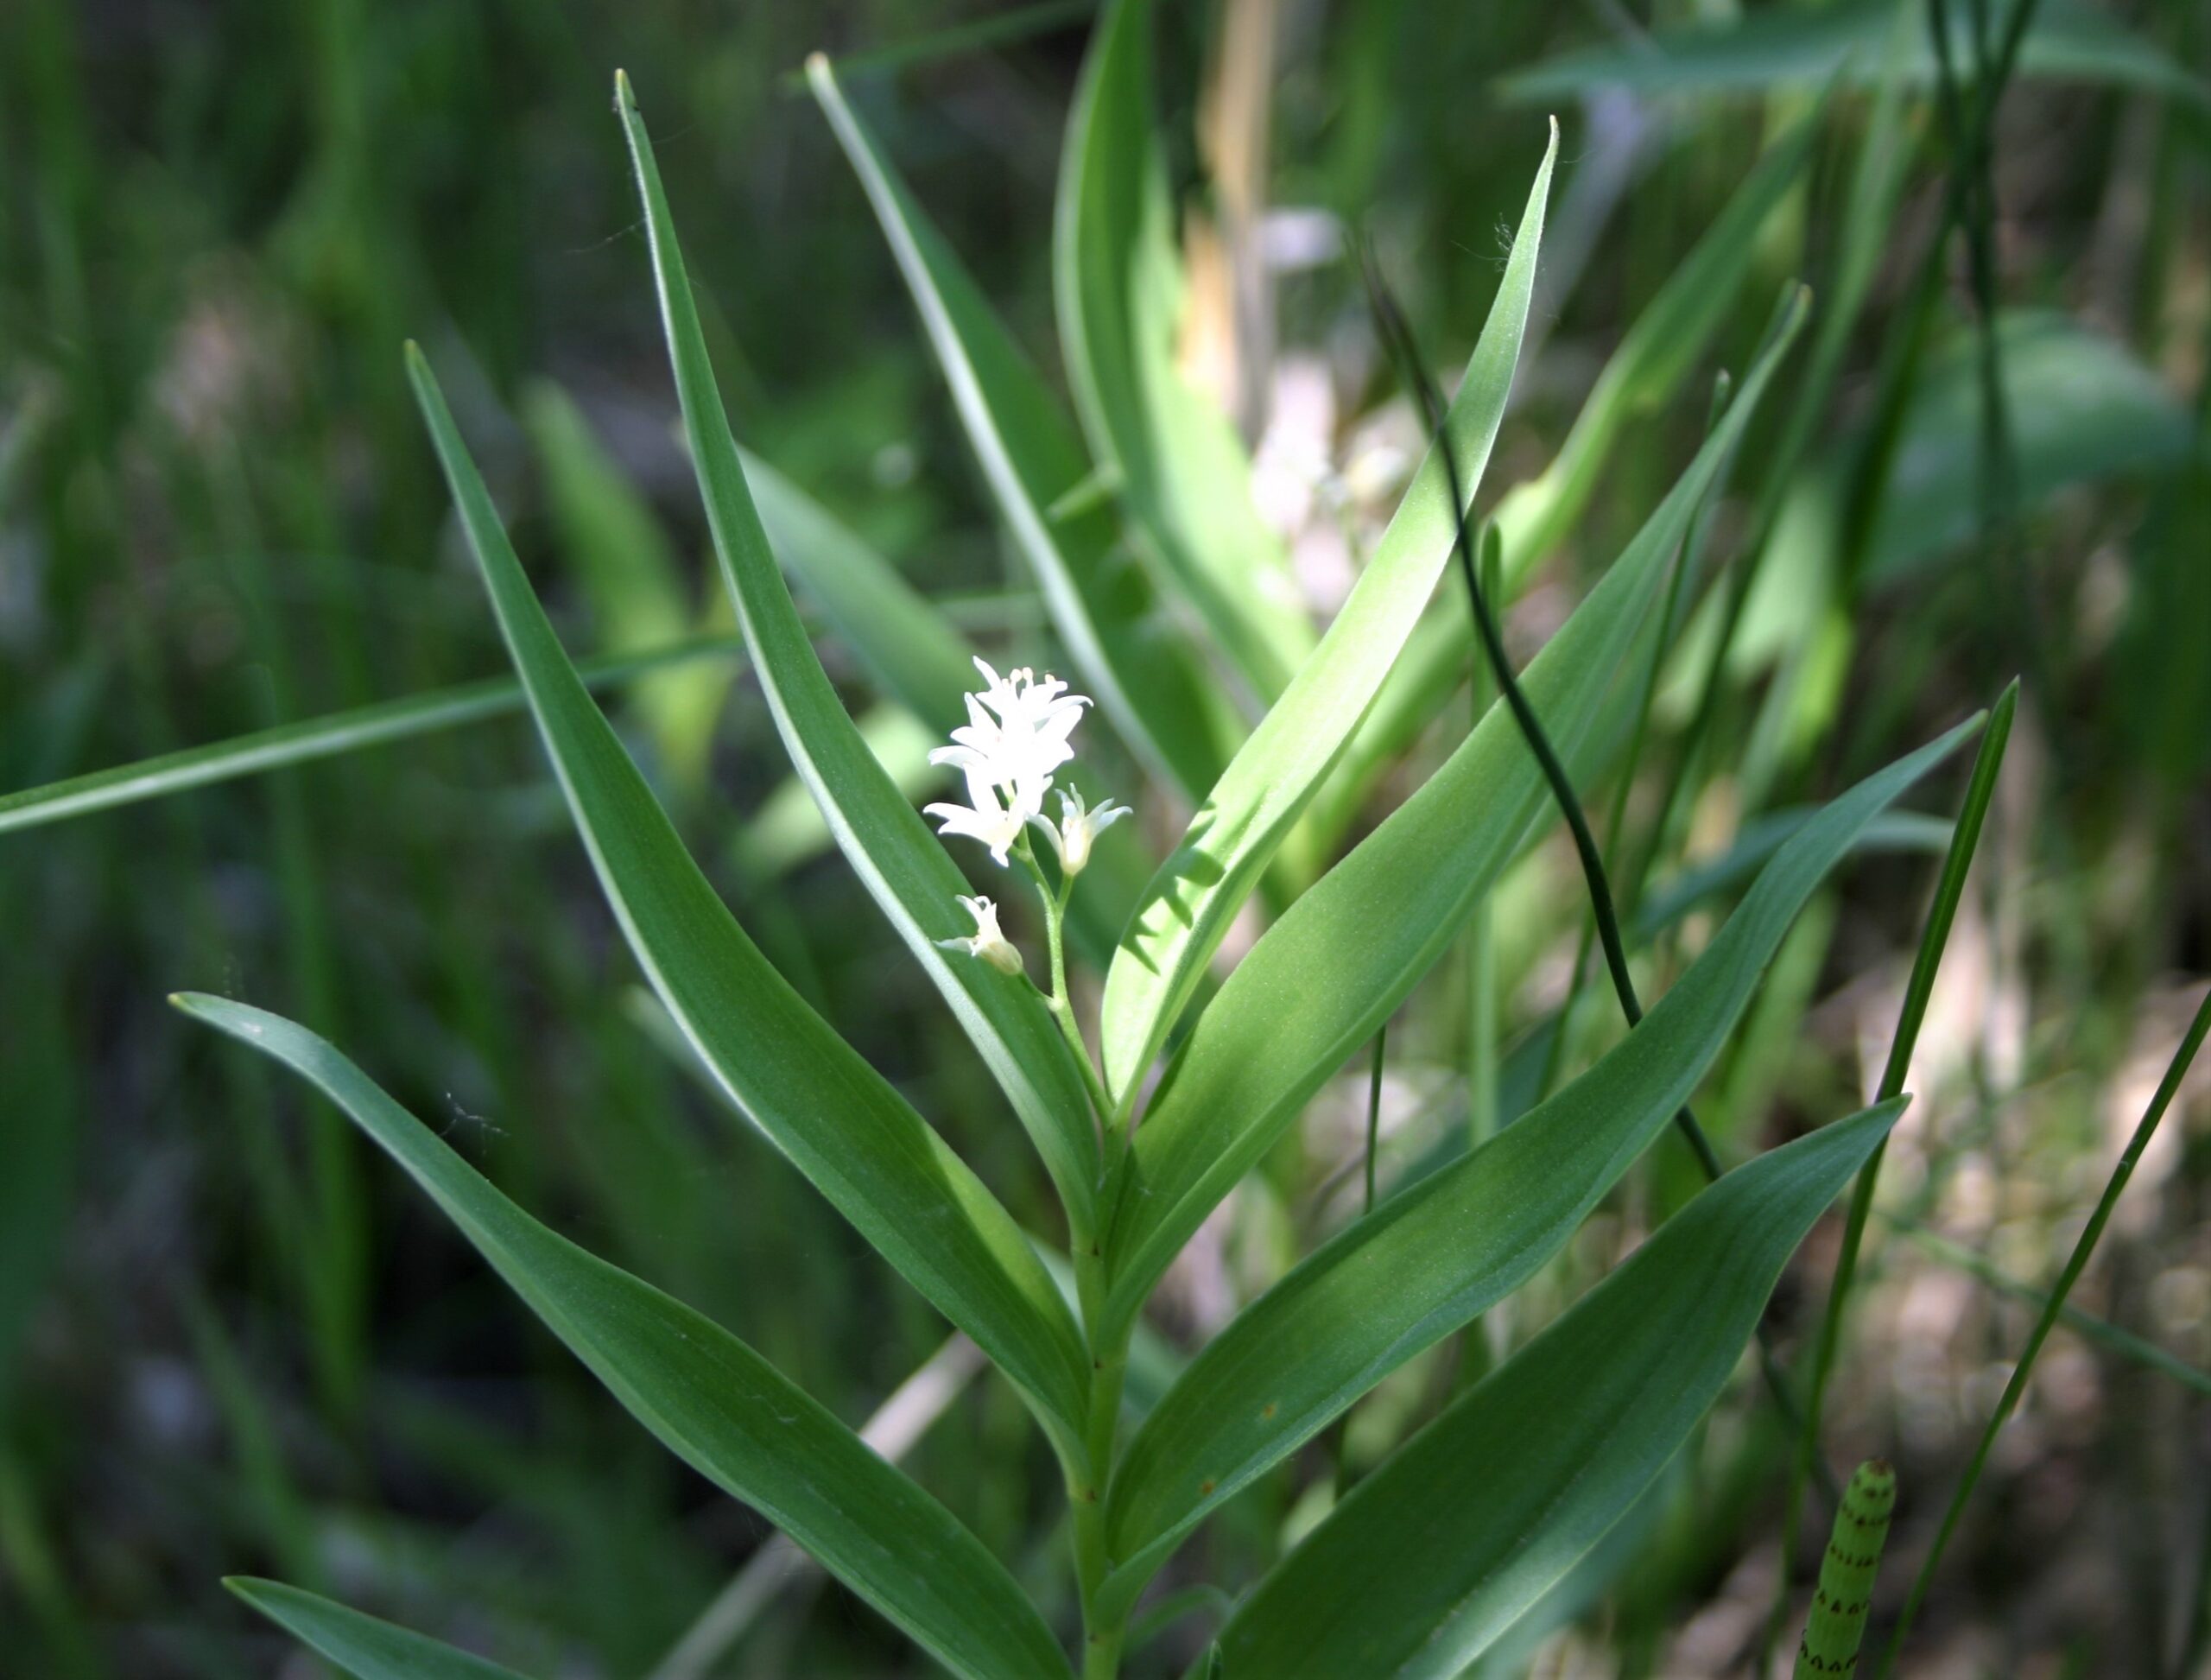 Close up on a plant with pairs of upwards growing thin, slightly curling leave. At the top is a cluster of very small white flowers